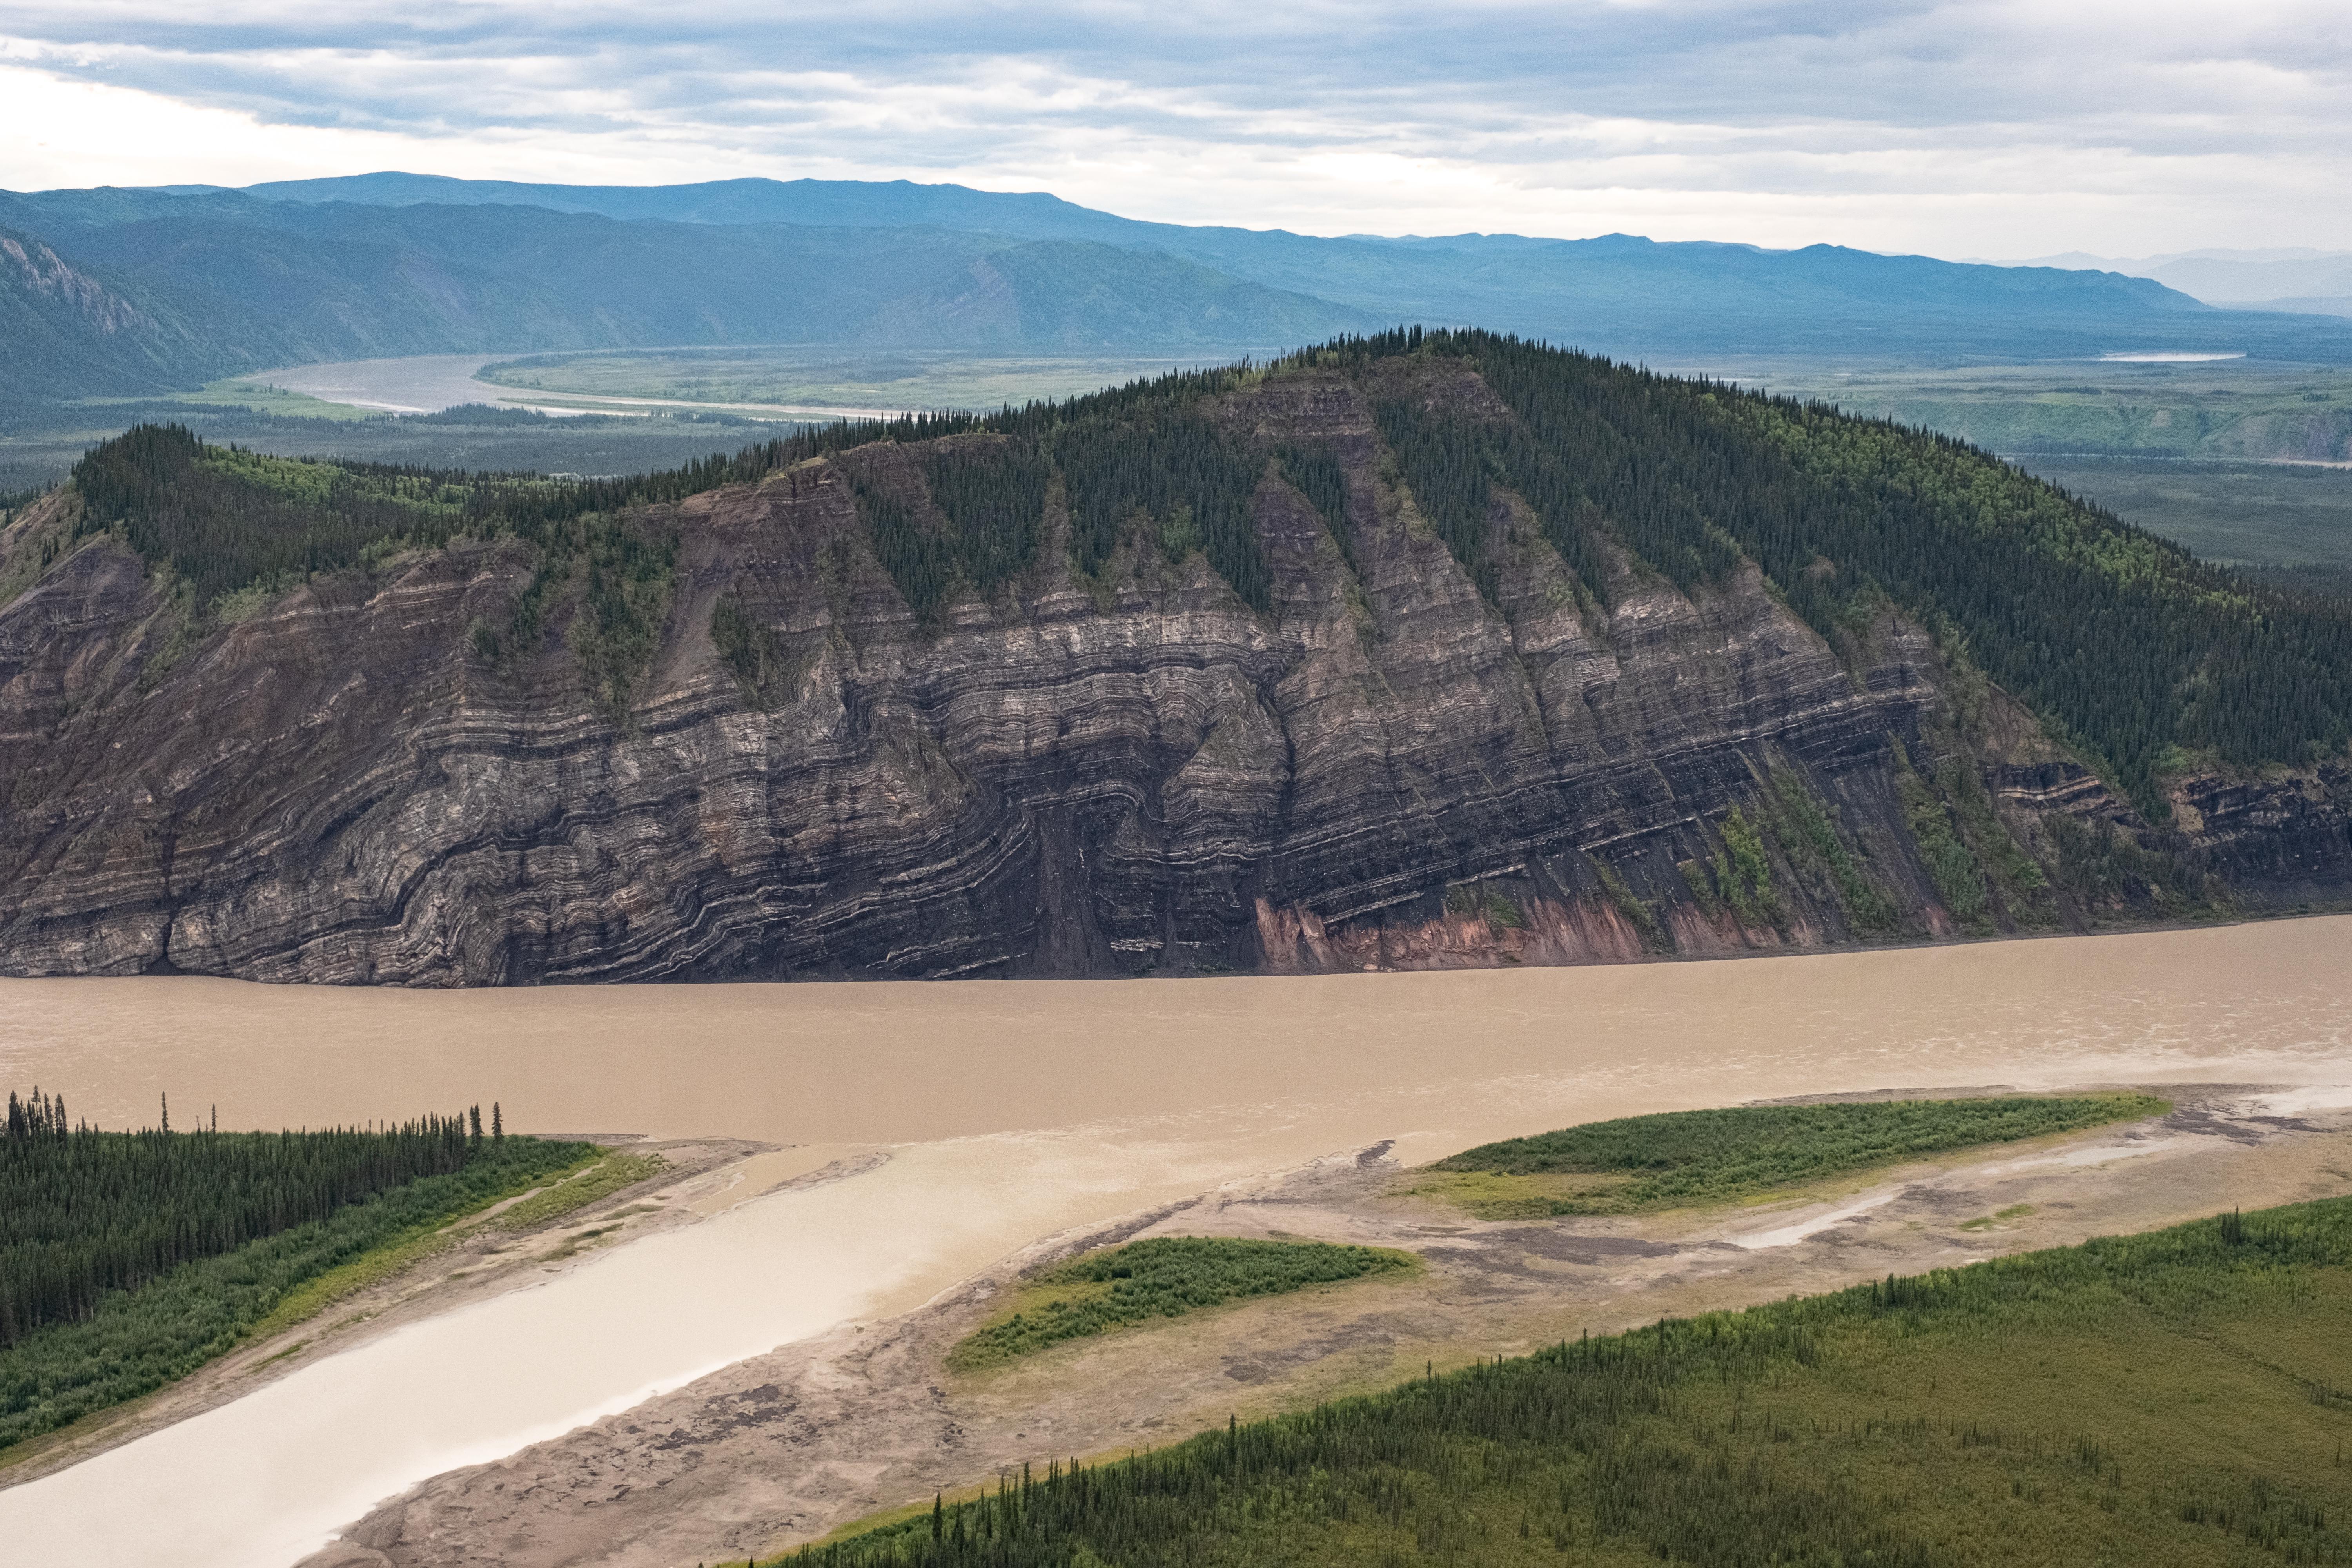 Calico Bluff rising above the Yukon River that also winds into the distance behind the bluff